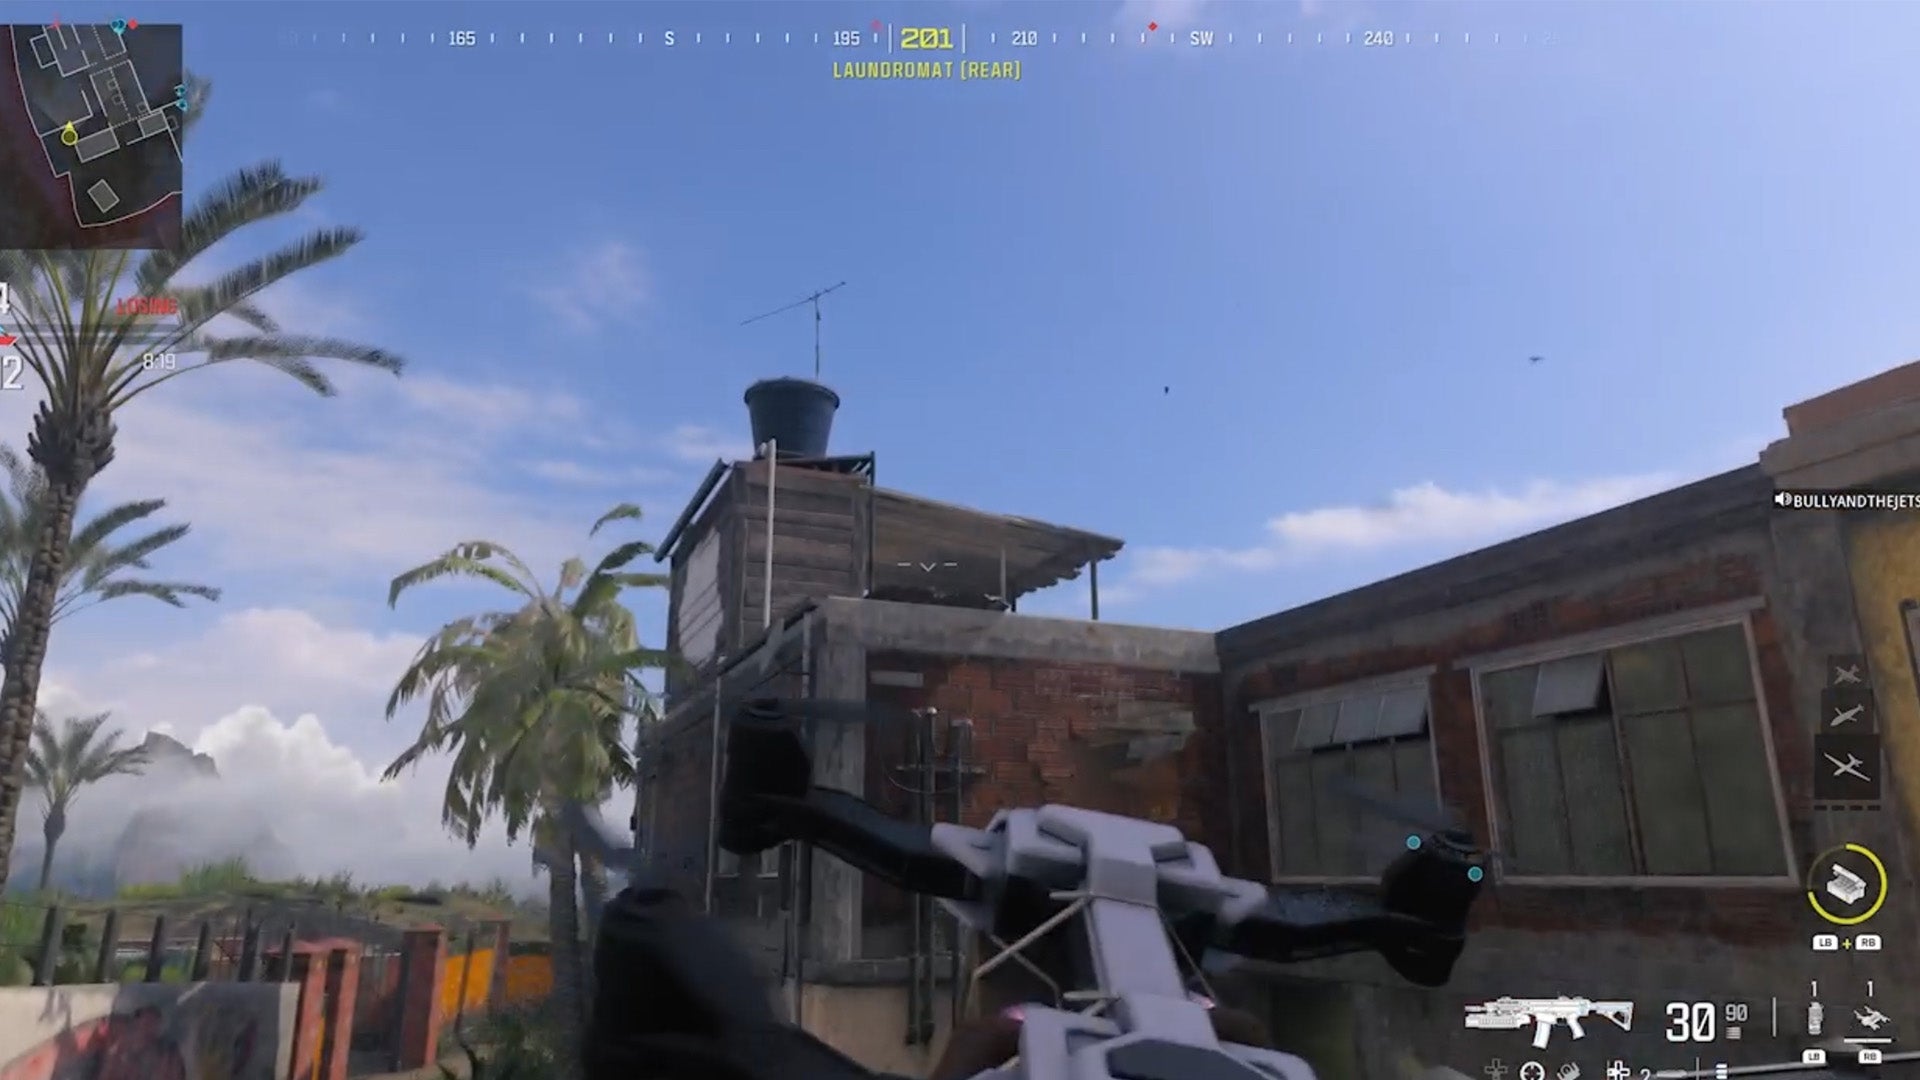 I'm Torturing Modern Warfare III Players With An Exploding Drone